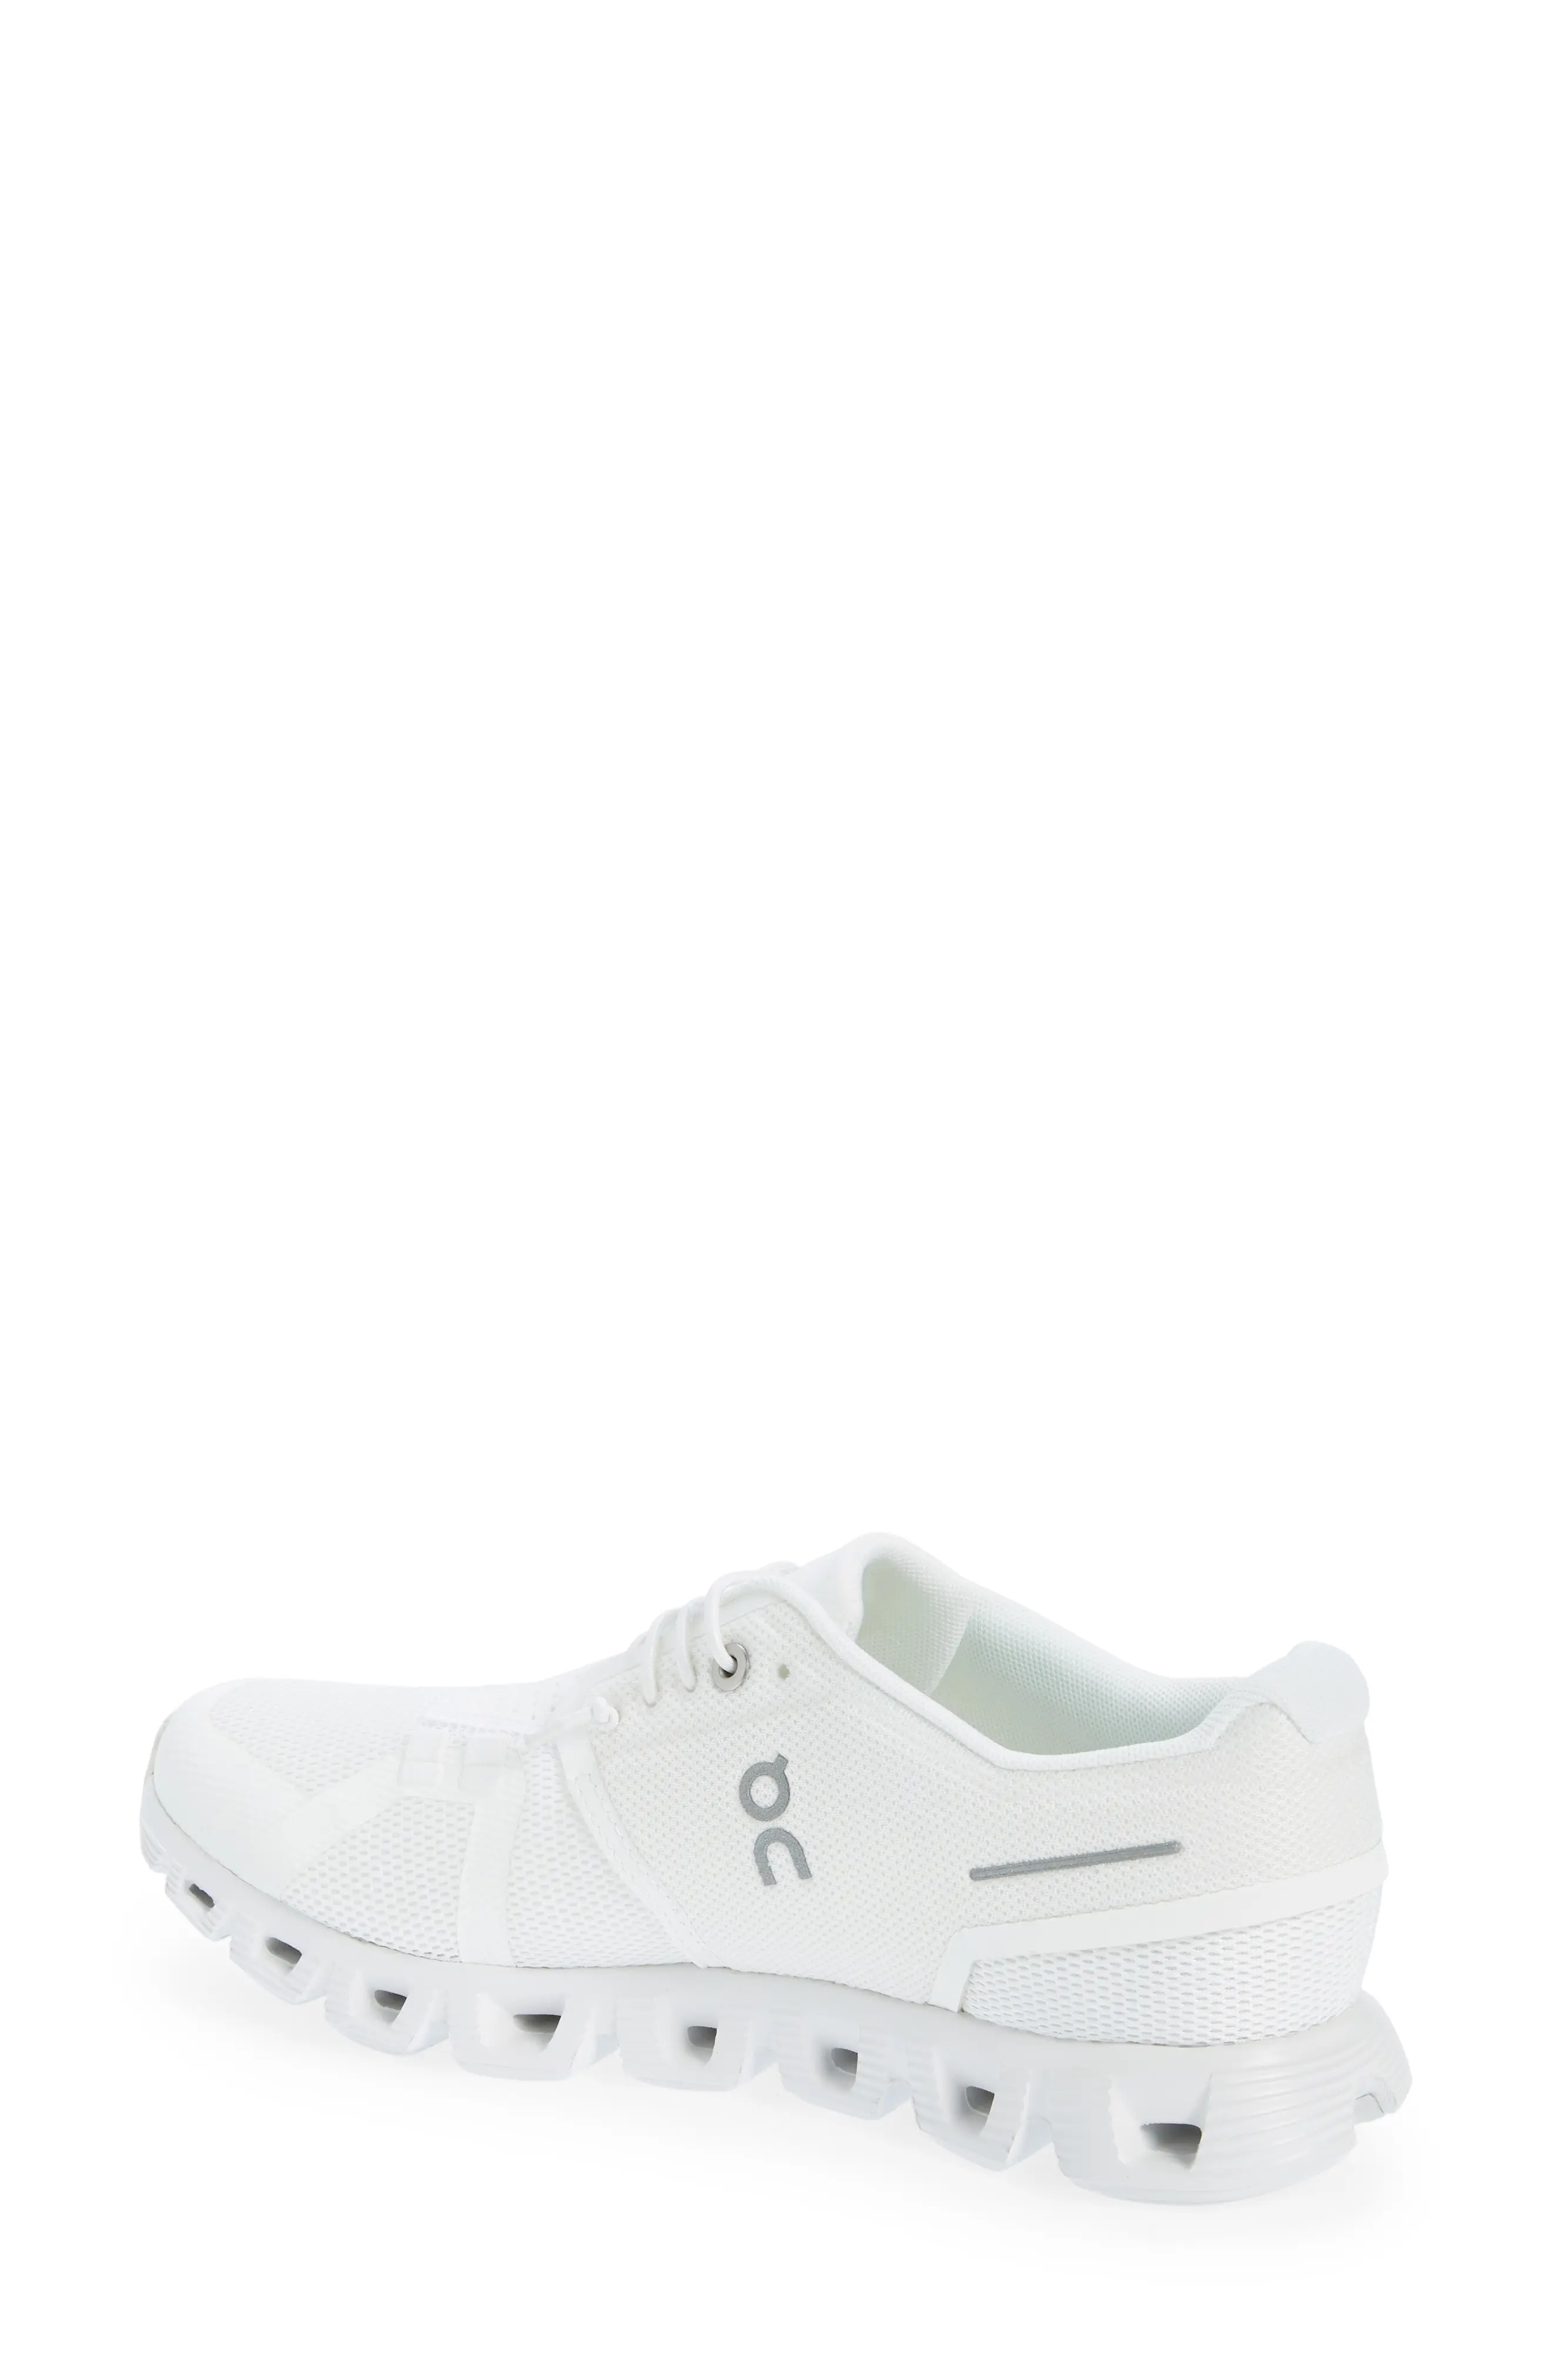 Cloud 5 Running Shoe in Undyed White/White - 2